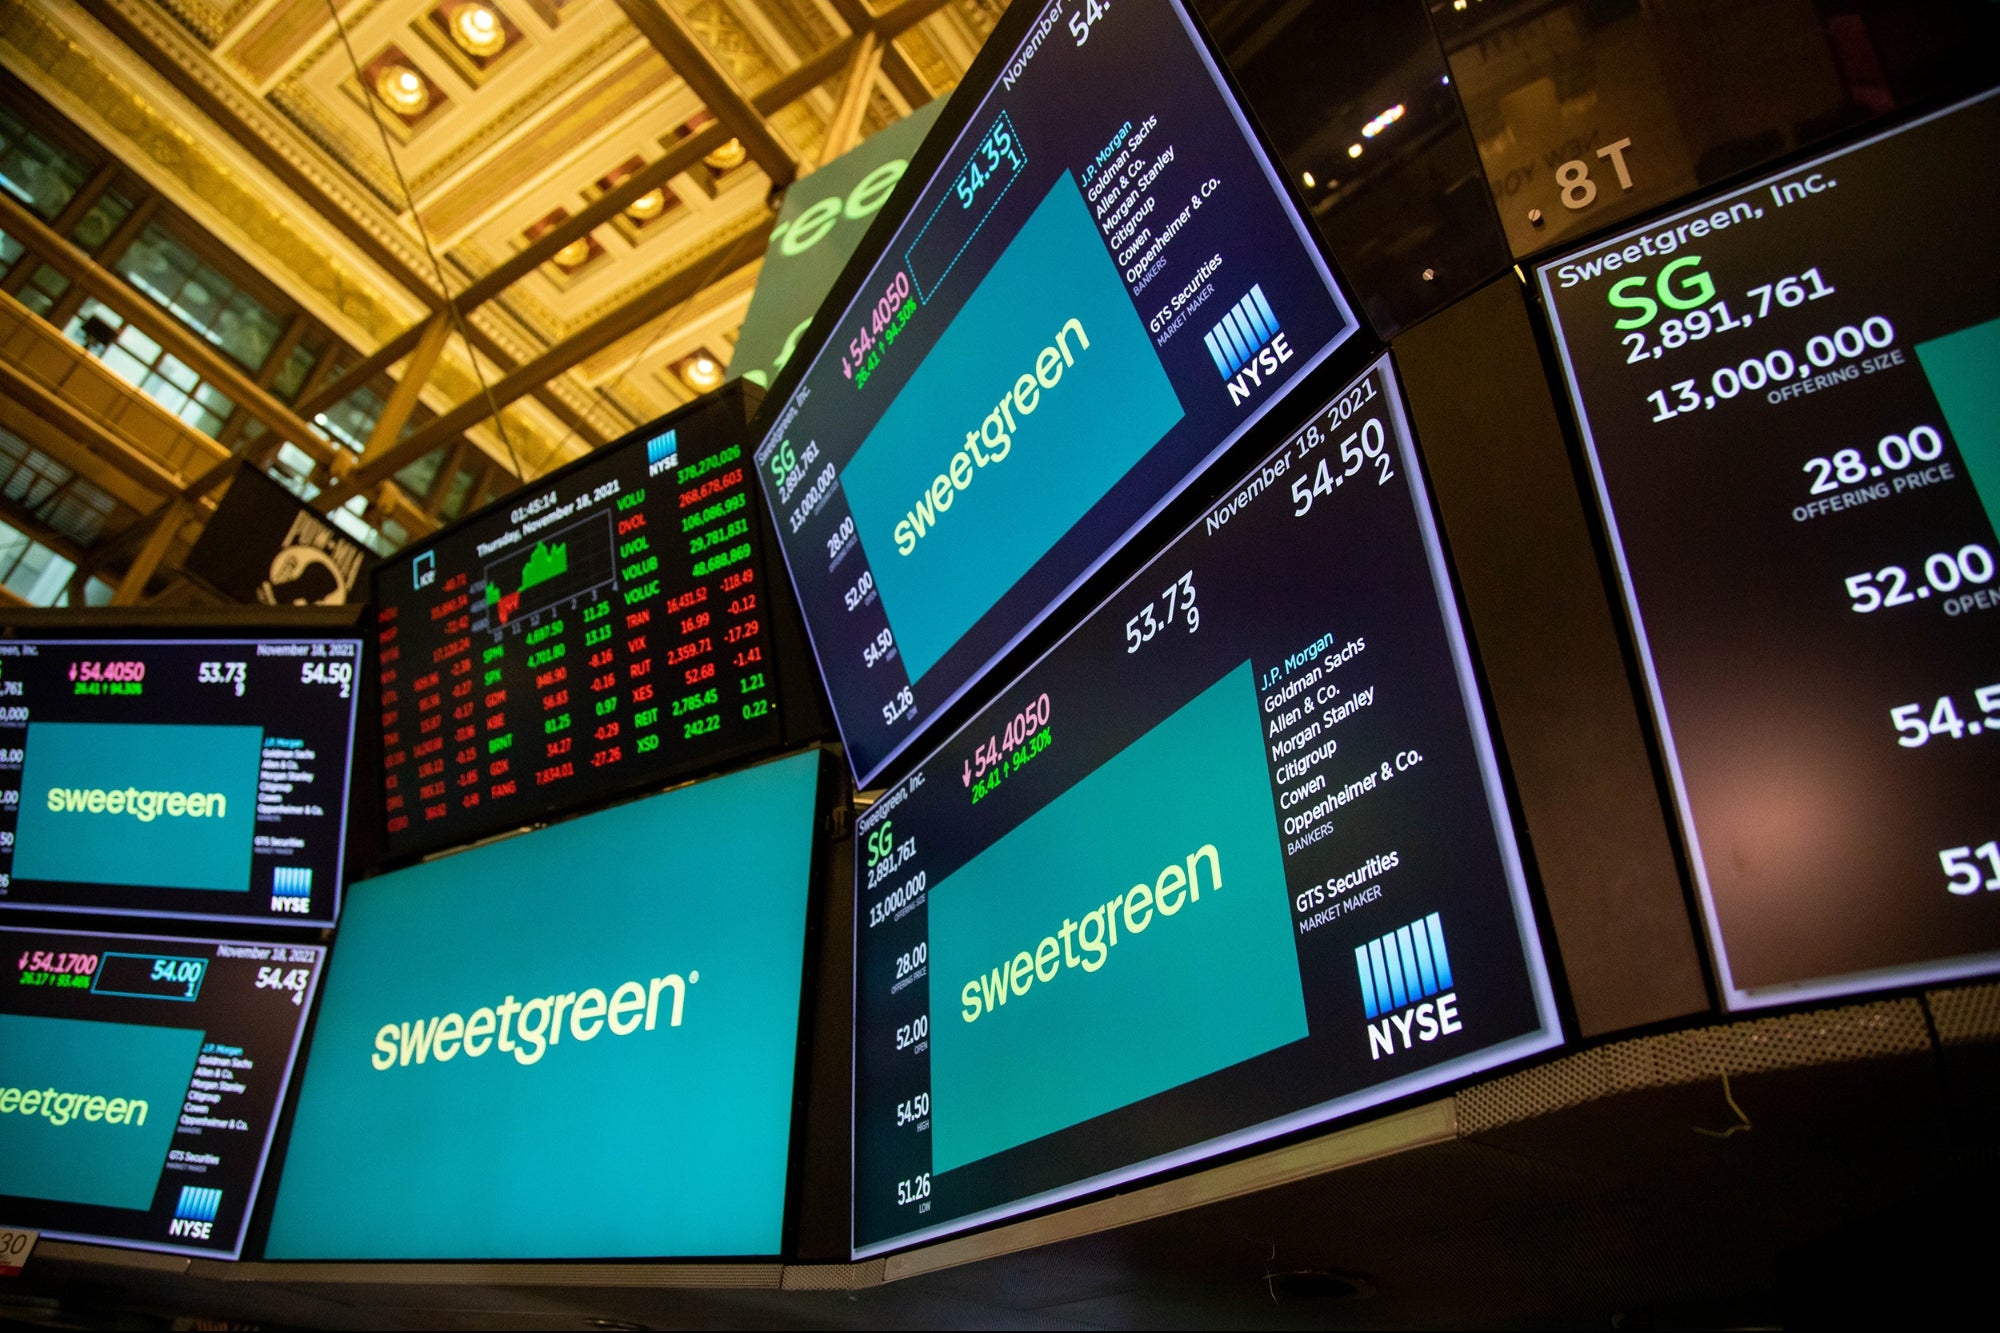 Sweetgreen Stock Jumps More Than 75% in Market Debut